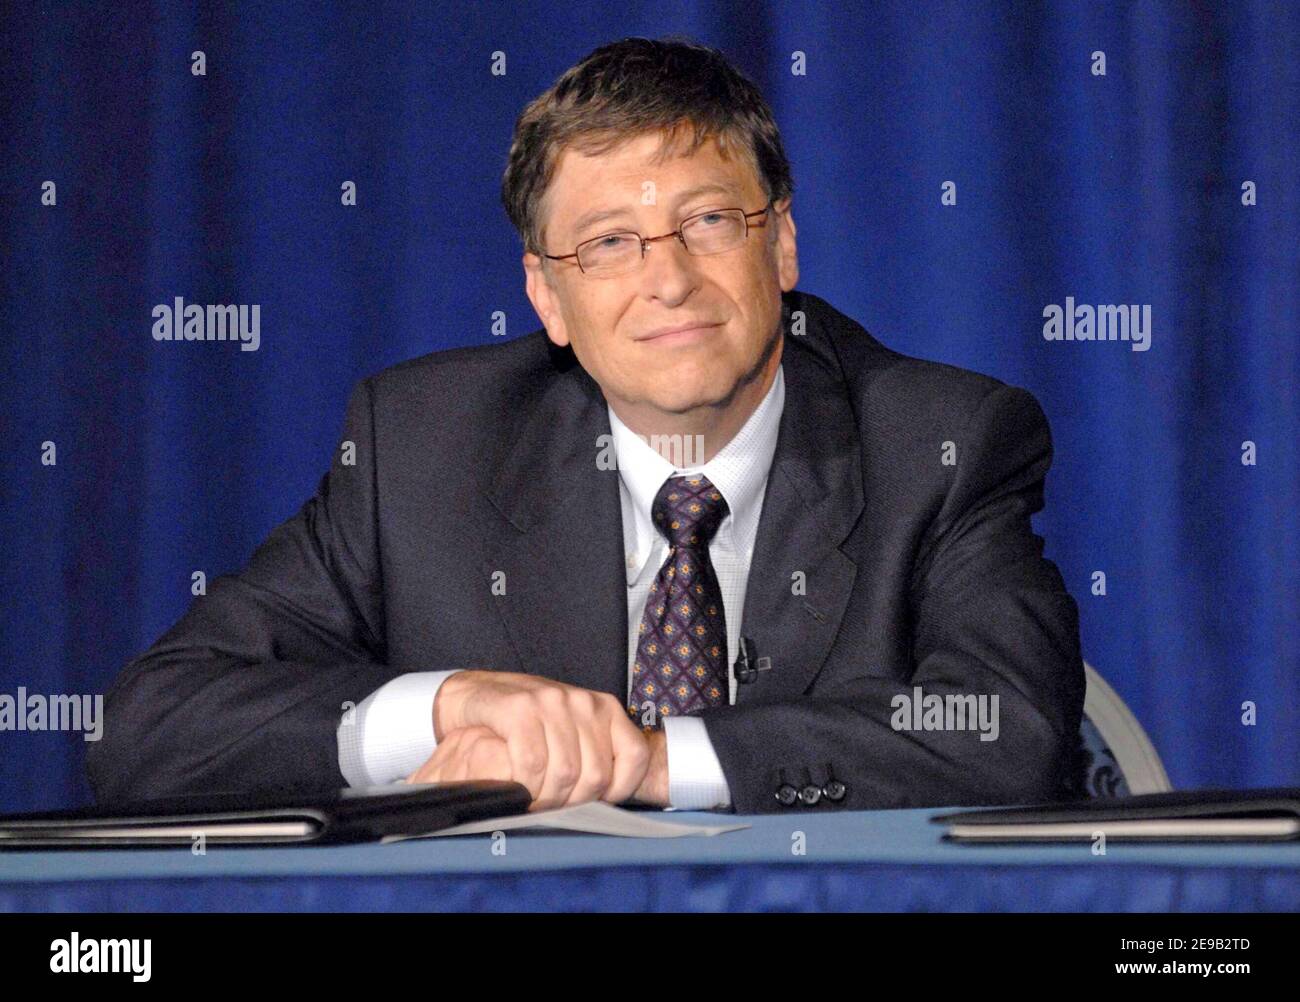 Bill Gates attends the press conference to announce Warren Buffett's pledged gift of $31 billion, to the Bill and Melinda Gates Foundation, held in New York City, NY, USA on June 26, 2006. Photo by David Miller/ABACAPRESS.COM Stock Photo